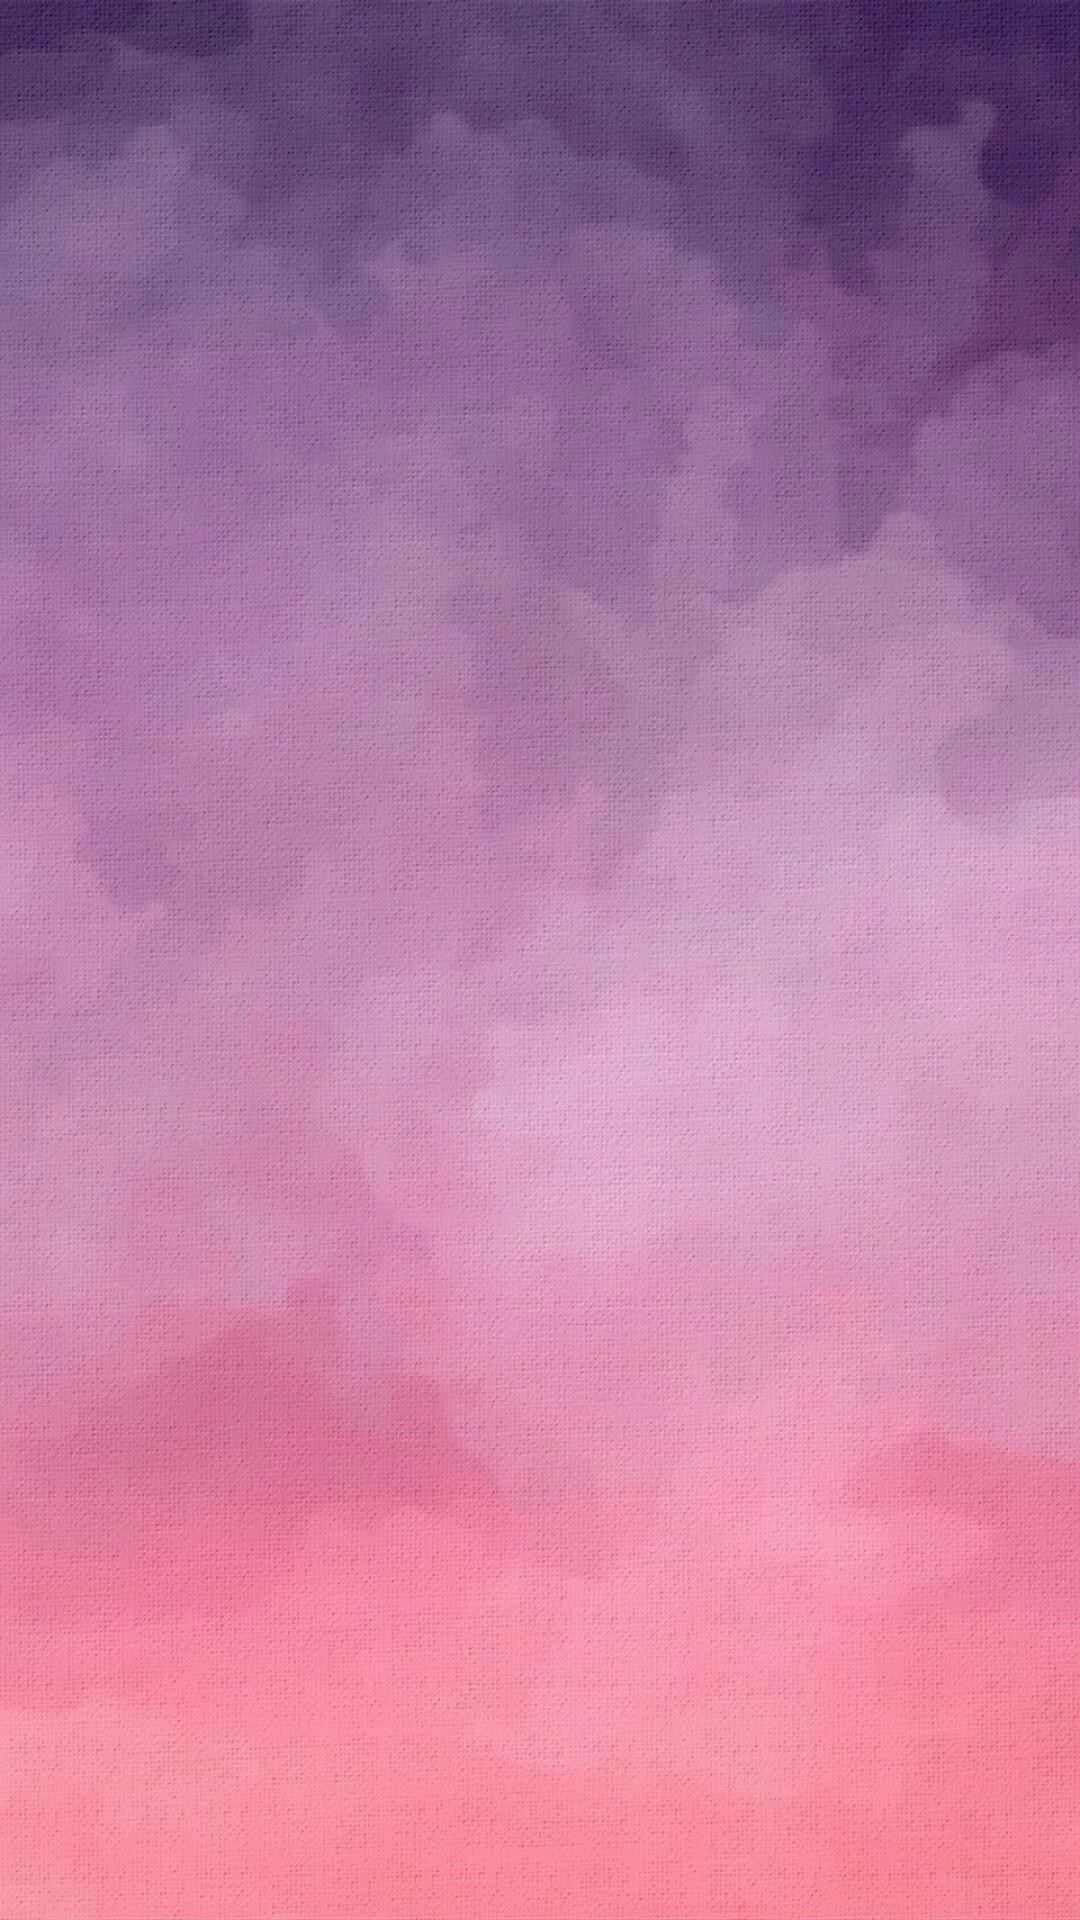 1080x1920 wallpaper.wiki-Backgrounds-Phone-Wallpapers-HD-PIC-WPE001938